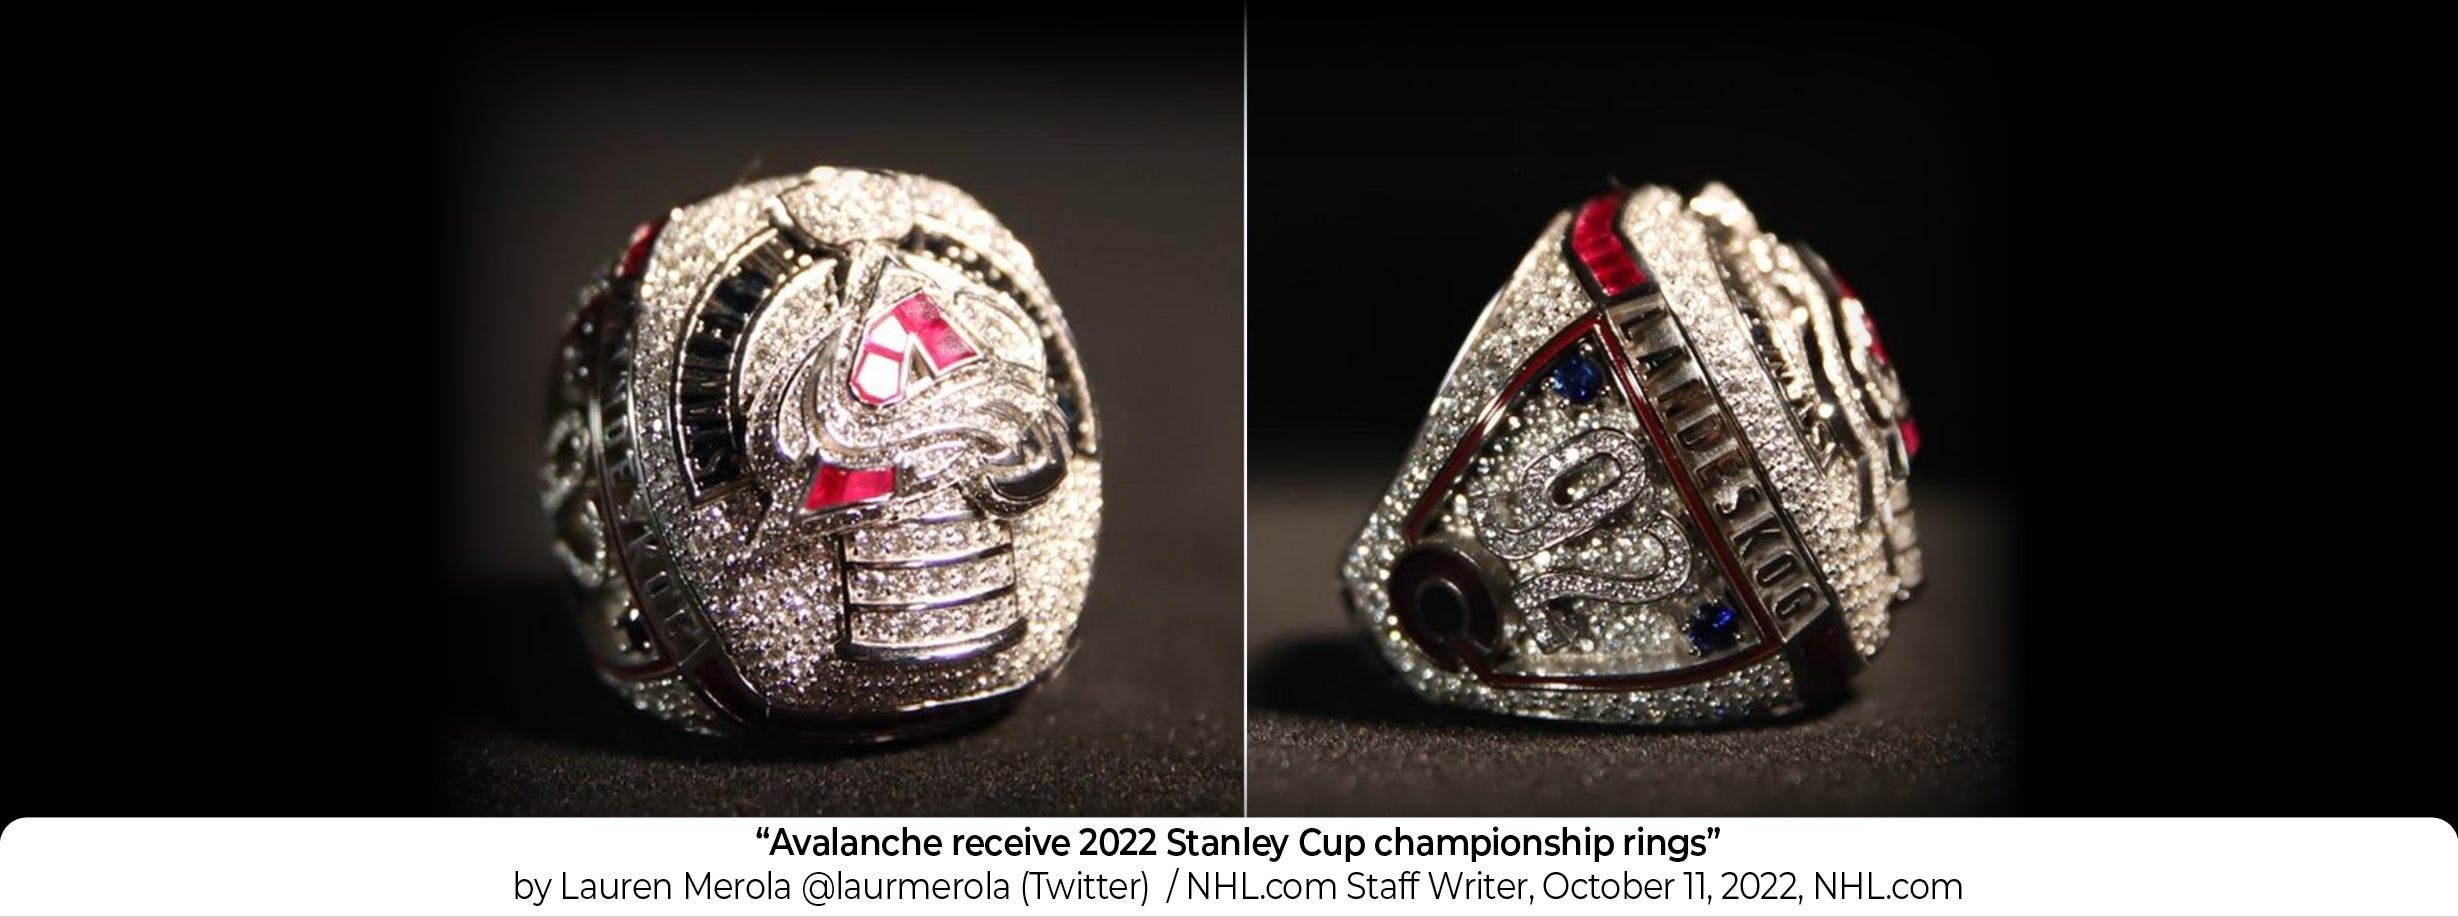 2023 2022 Colorado Avalanche Stanley Cup NHL Championship Ring FREE  SHIPPING